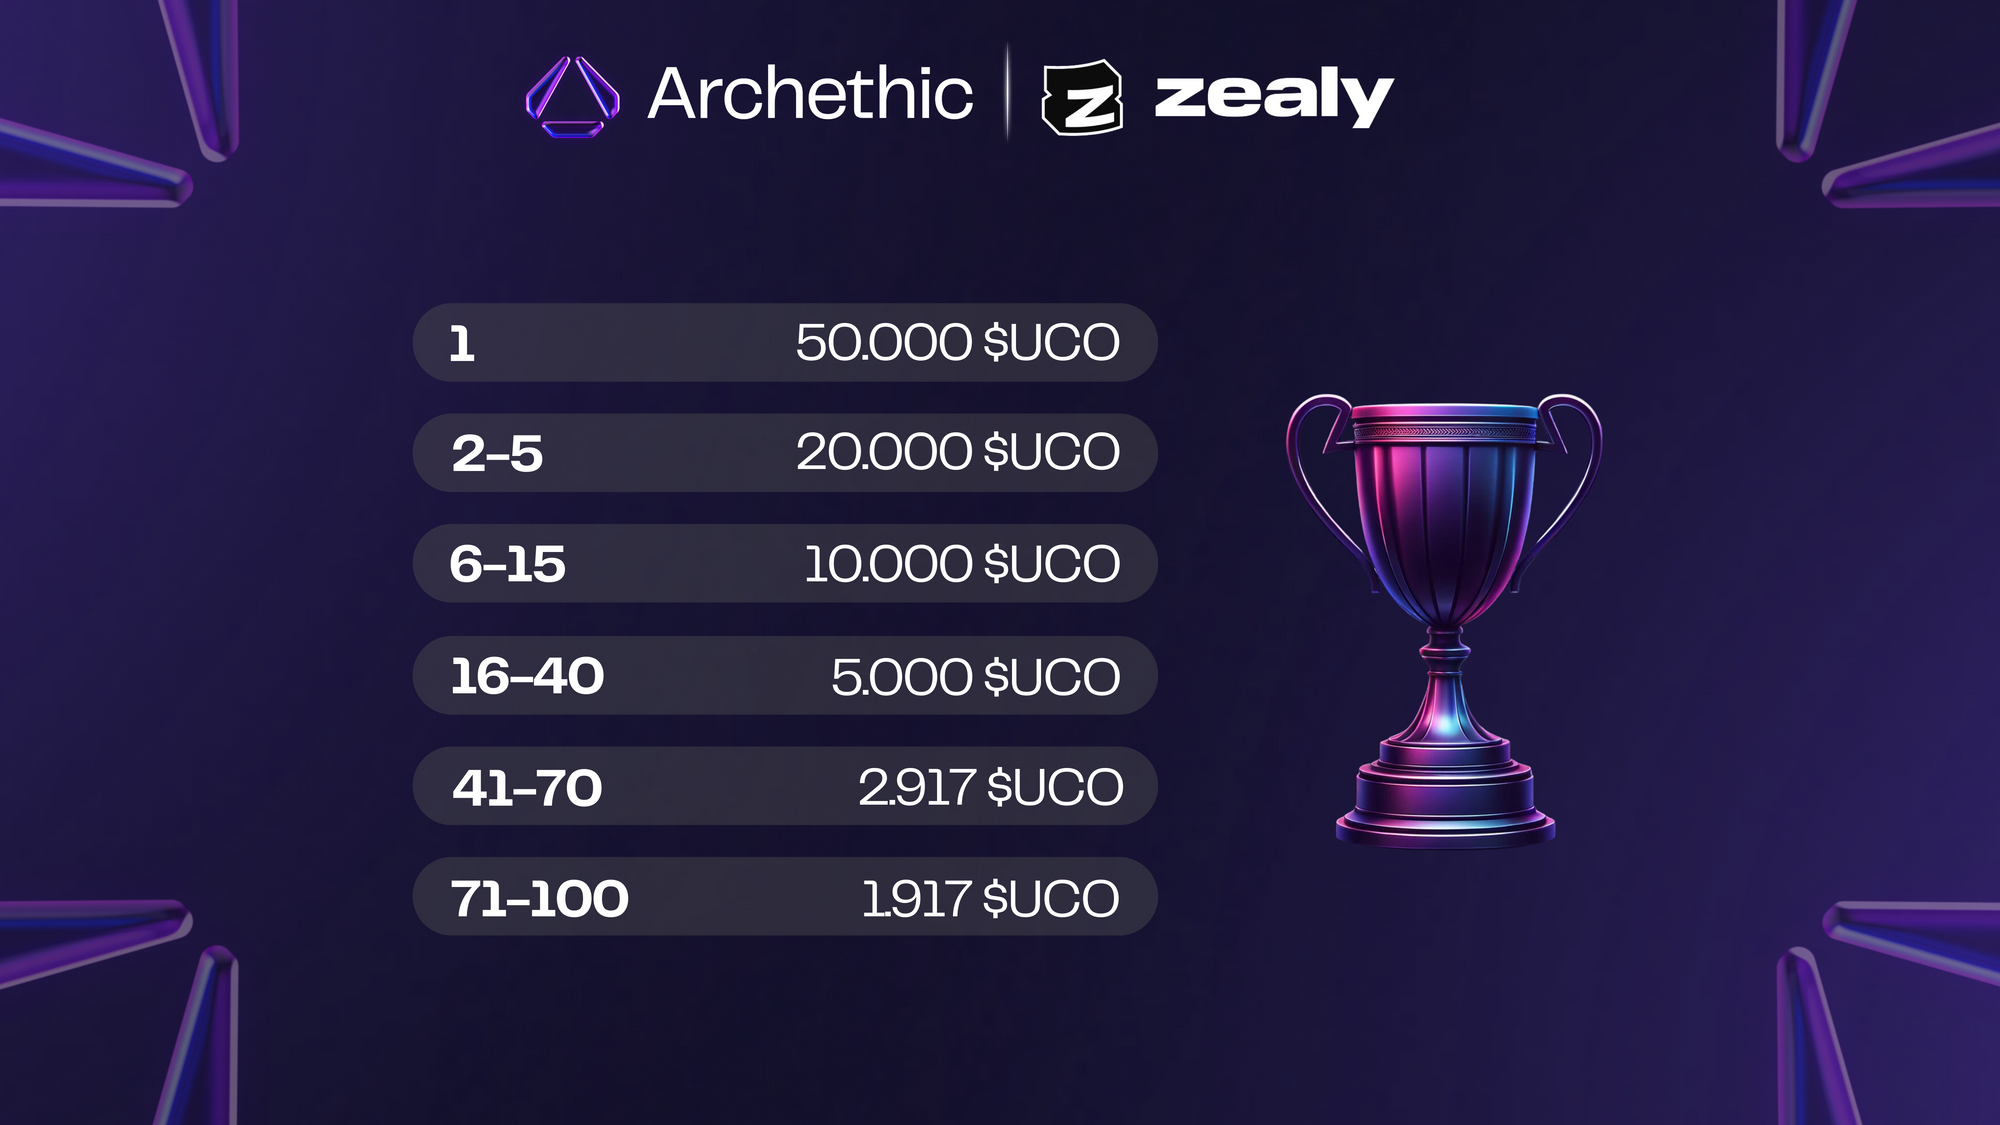 Archethic's Zealy Campaign